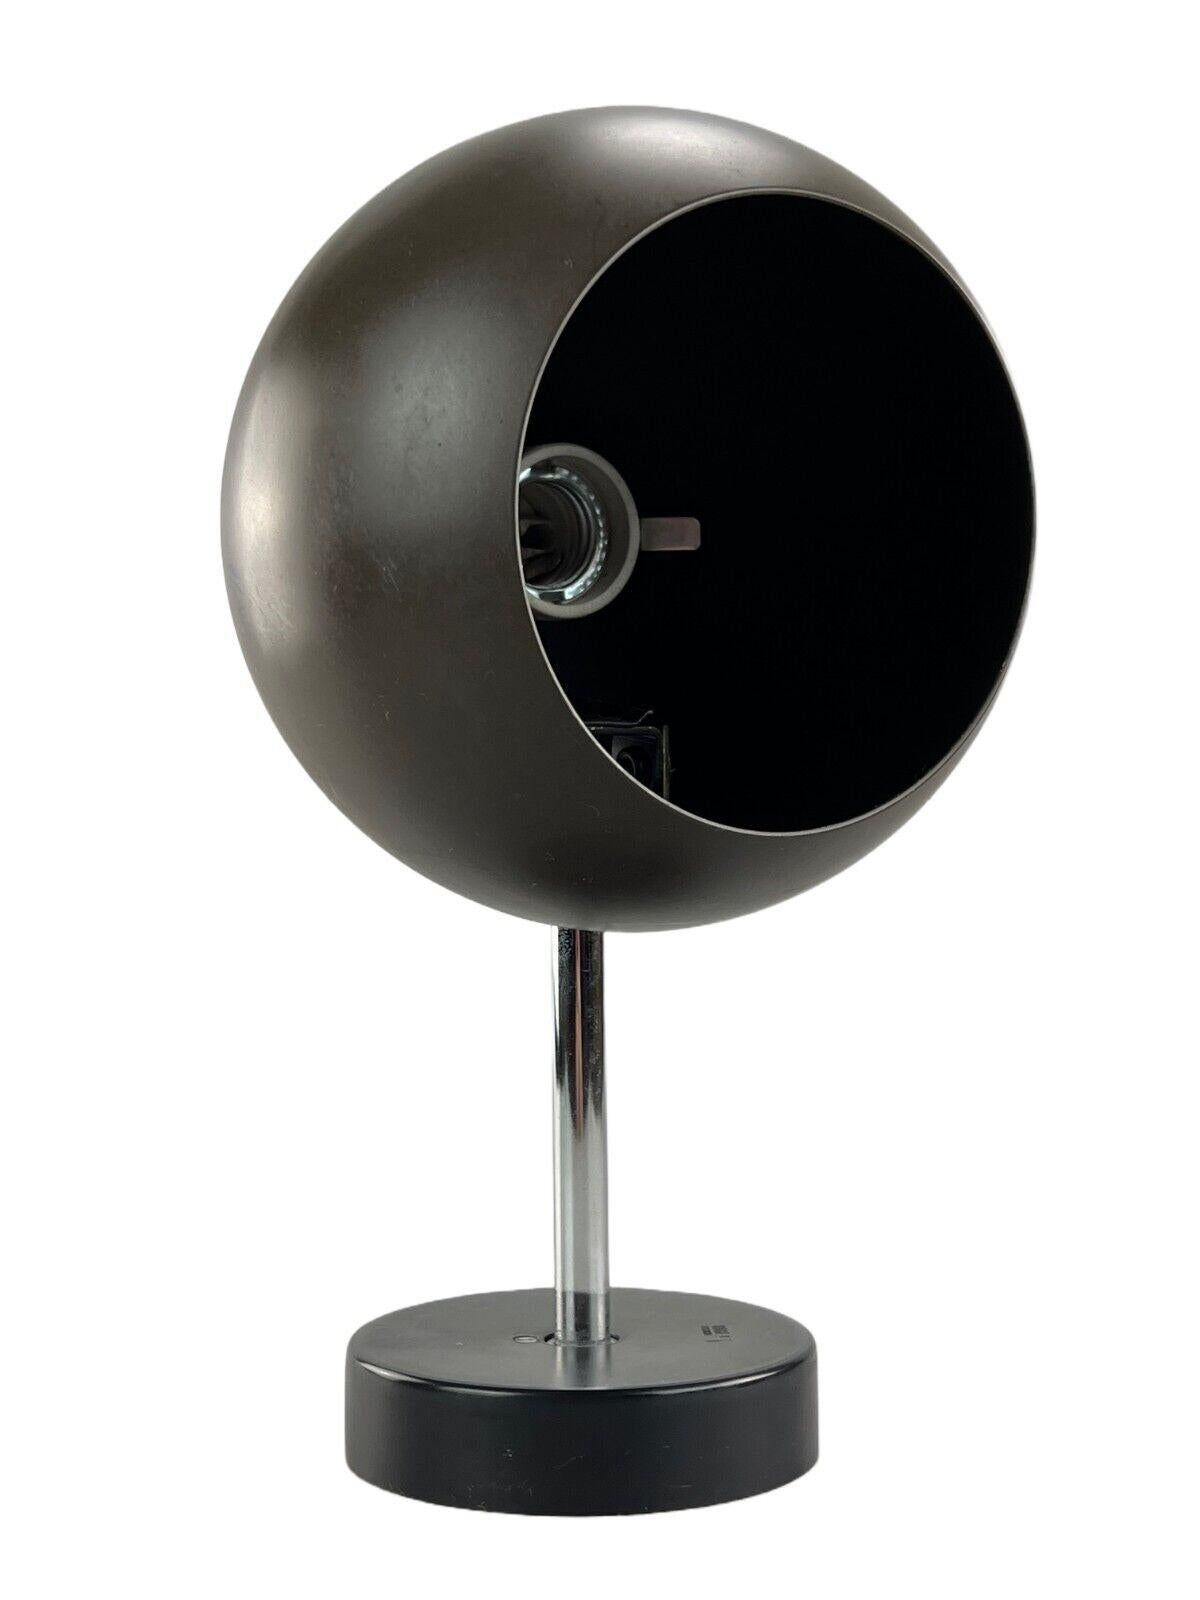 1960s 1970s wall lamp ball lamp Staff Leuchten Germany Design

Object: wall lamp

Manufacturer: Staff

Condition: good - vintage

Age: around 1960-1970

Dimensions:

Width = 15.5cm
Depth = 18cm
Height = 30cm

Other notes:

E27